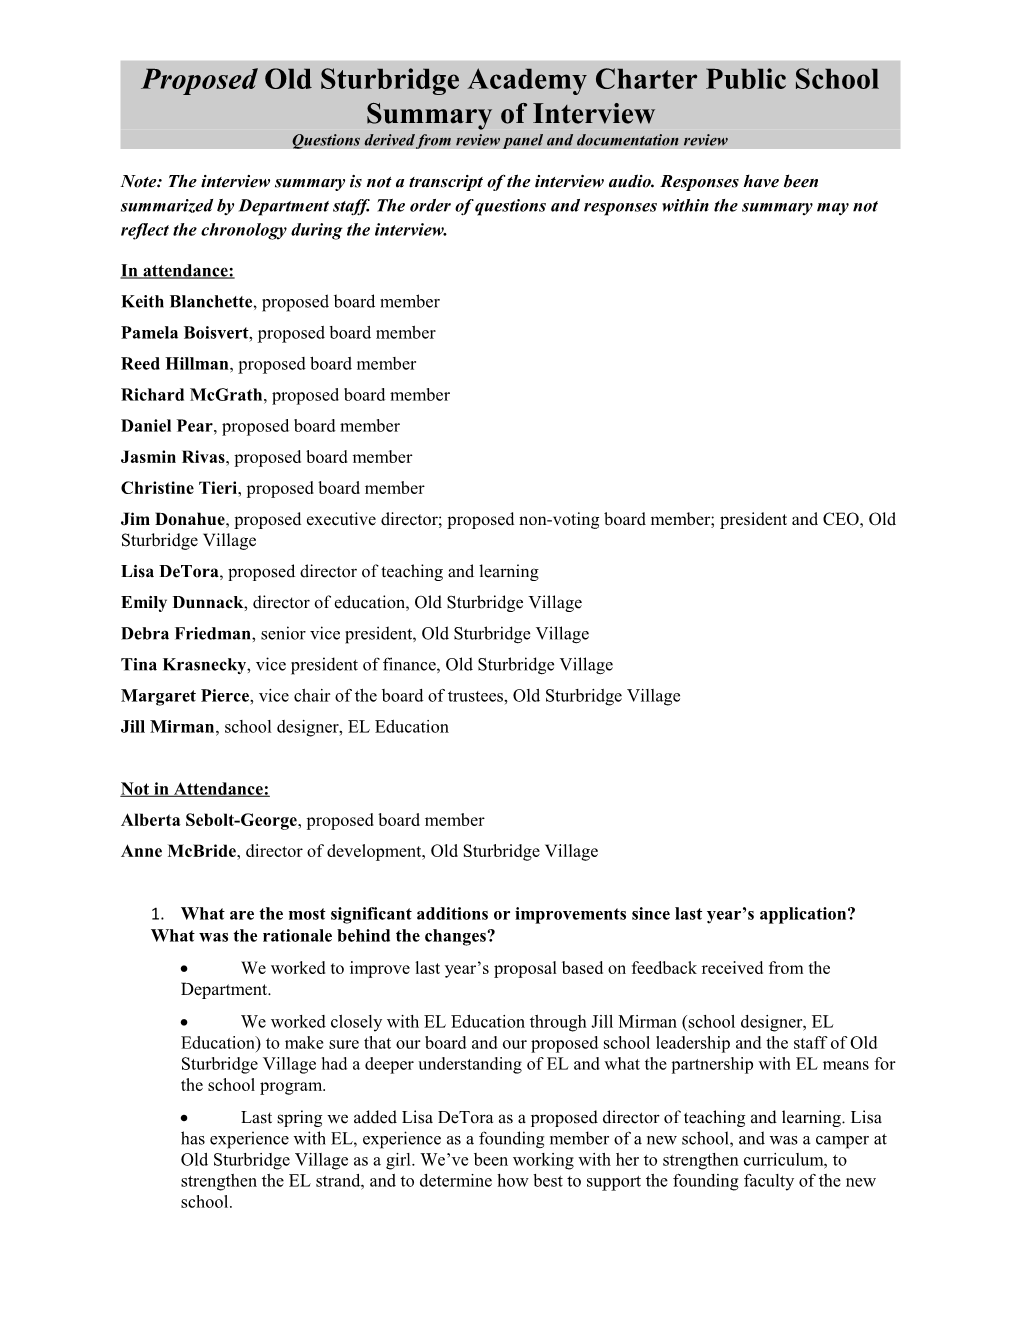 Proposed Old Sturbridge Academy Charter Public School Summary of Interview